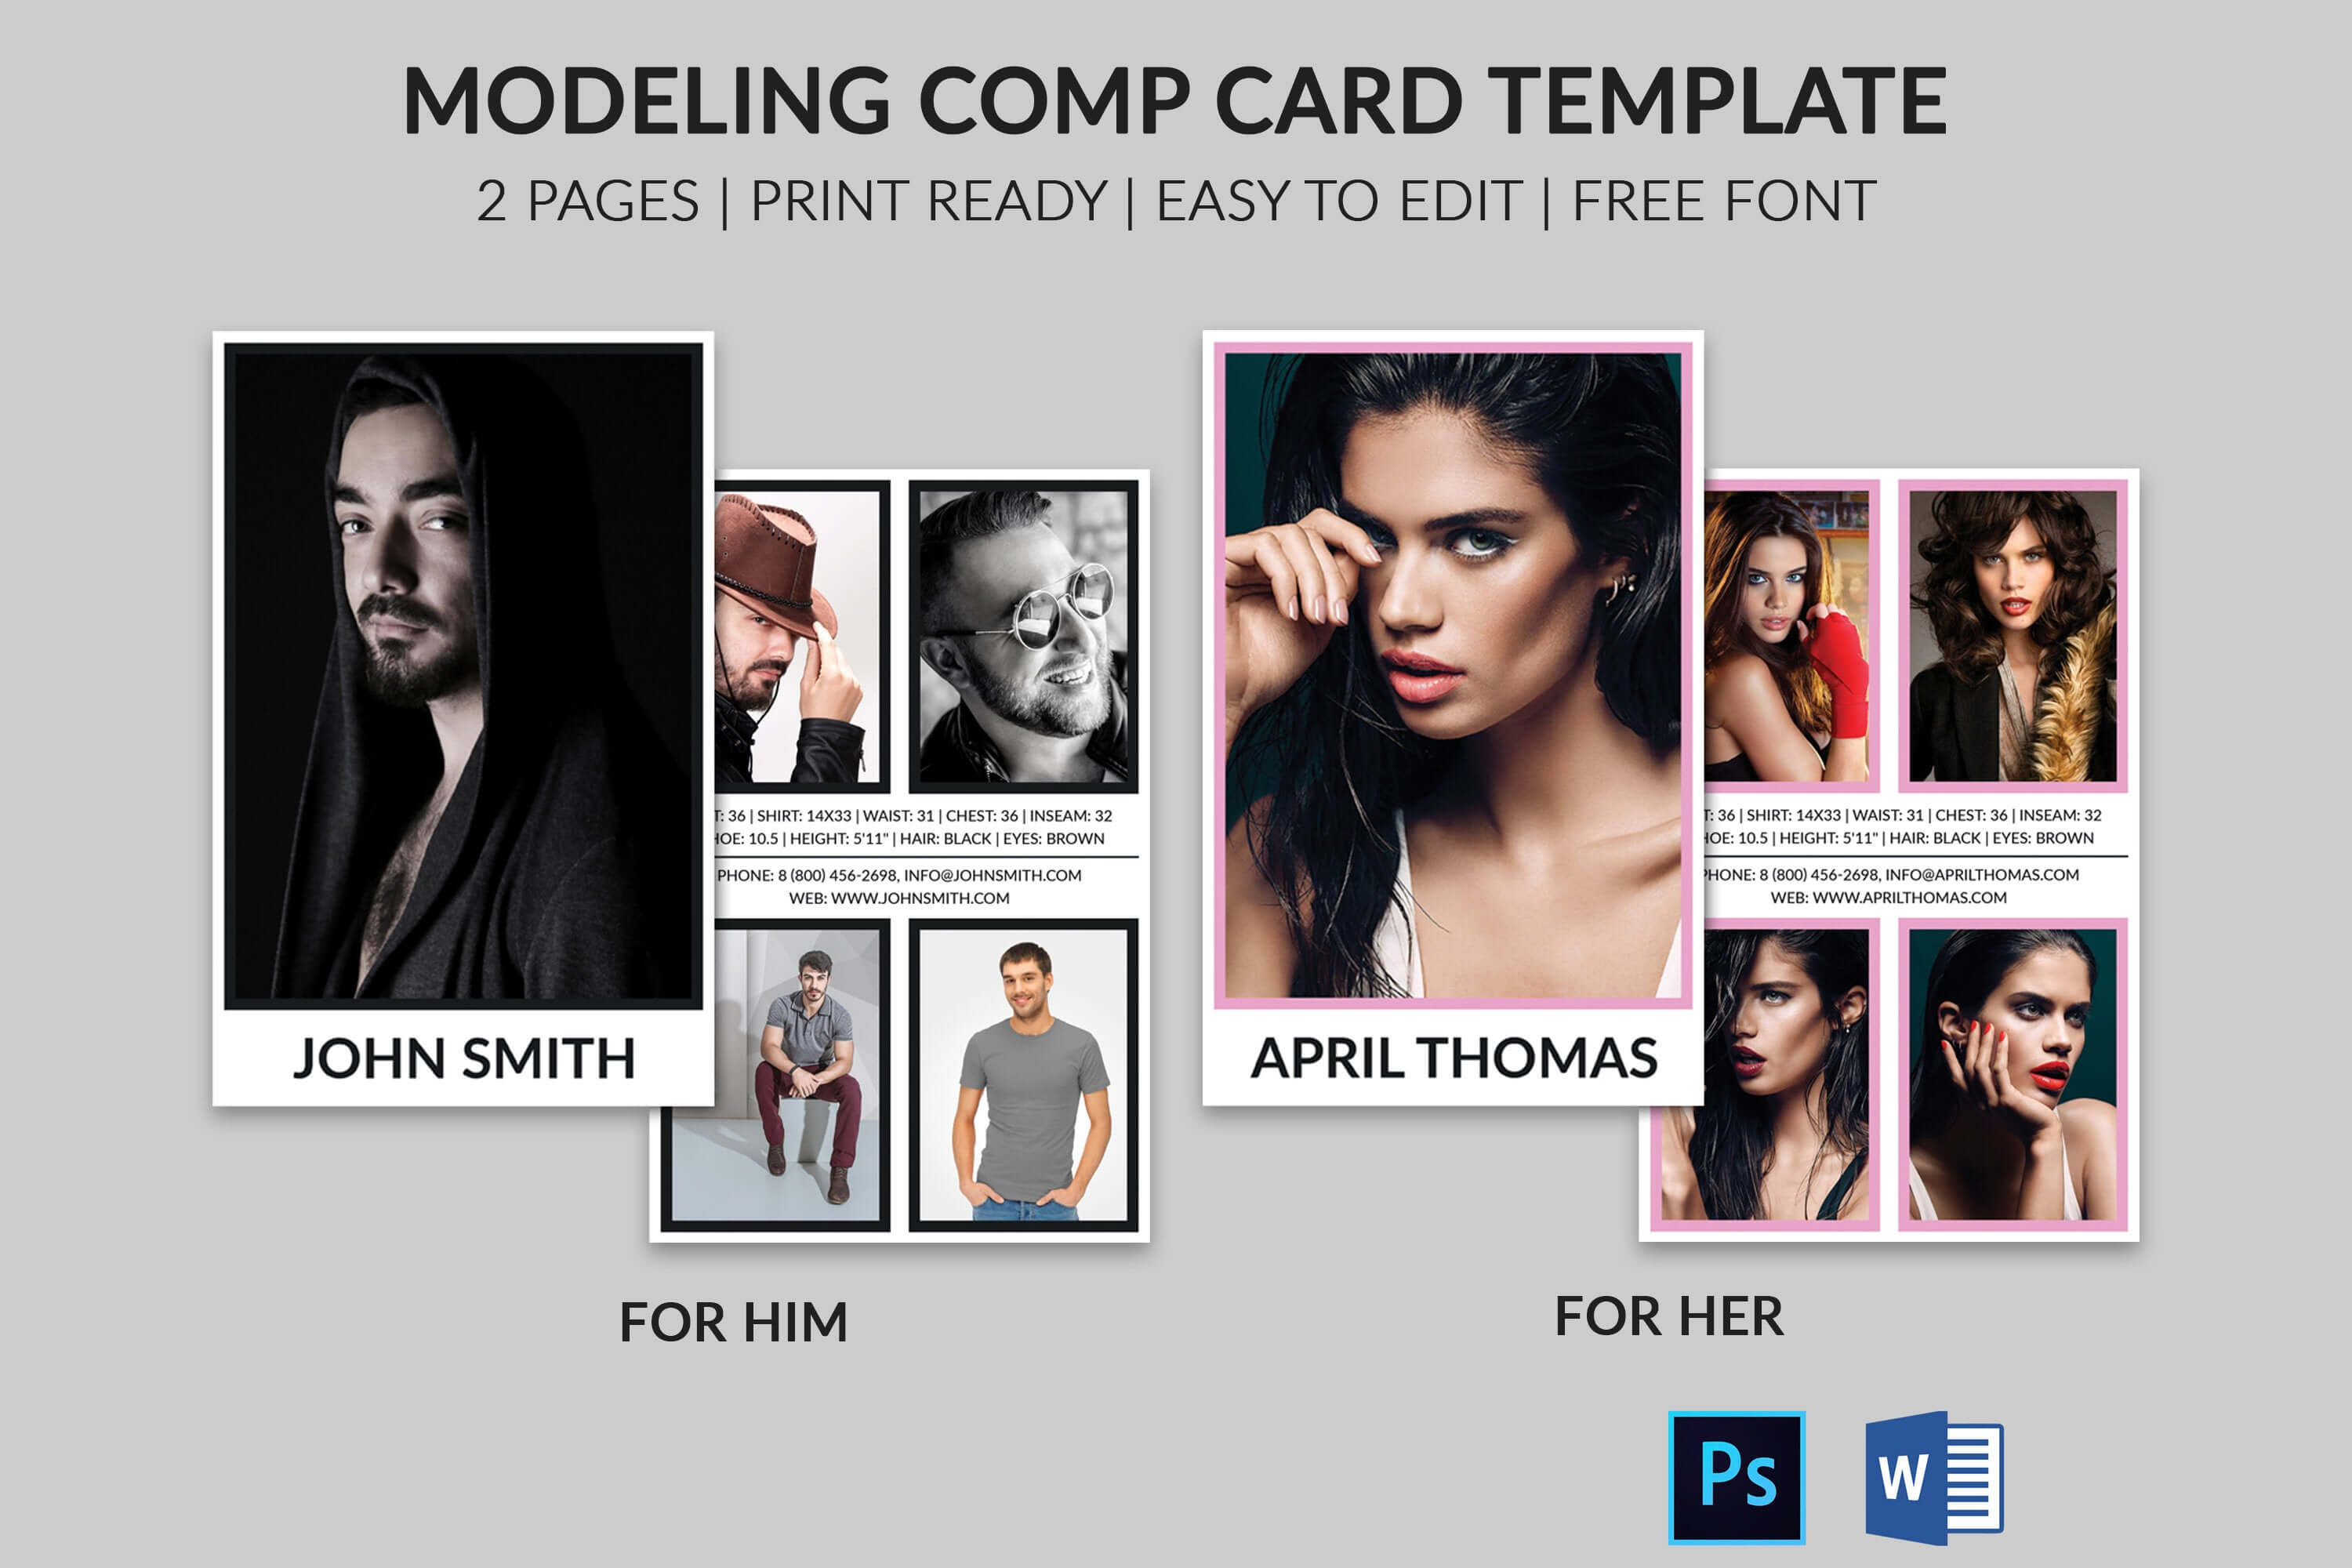 Modeling Comp Card | Model Agency Zed Card | Photoshop & Ms Word Template  |Modeling Card | Comp Card | Model Comp Card | Instant Download Intended For Zed Card Template Free